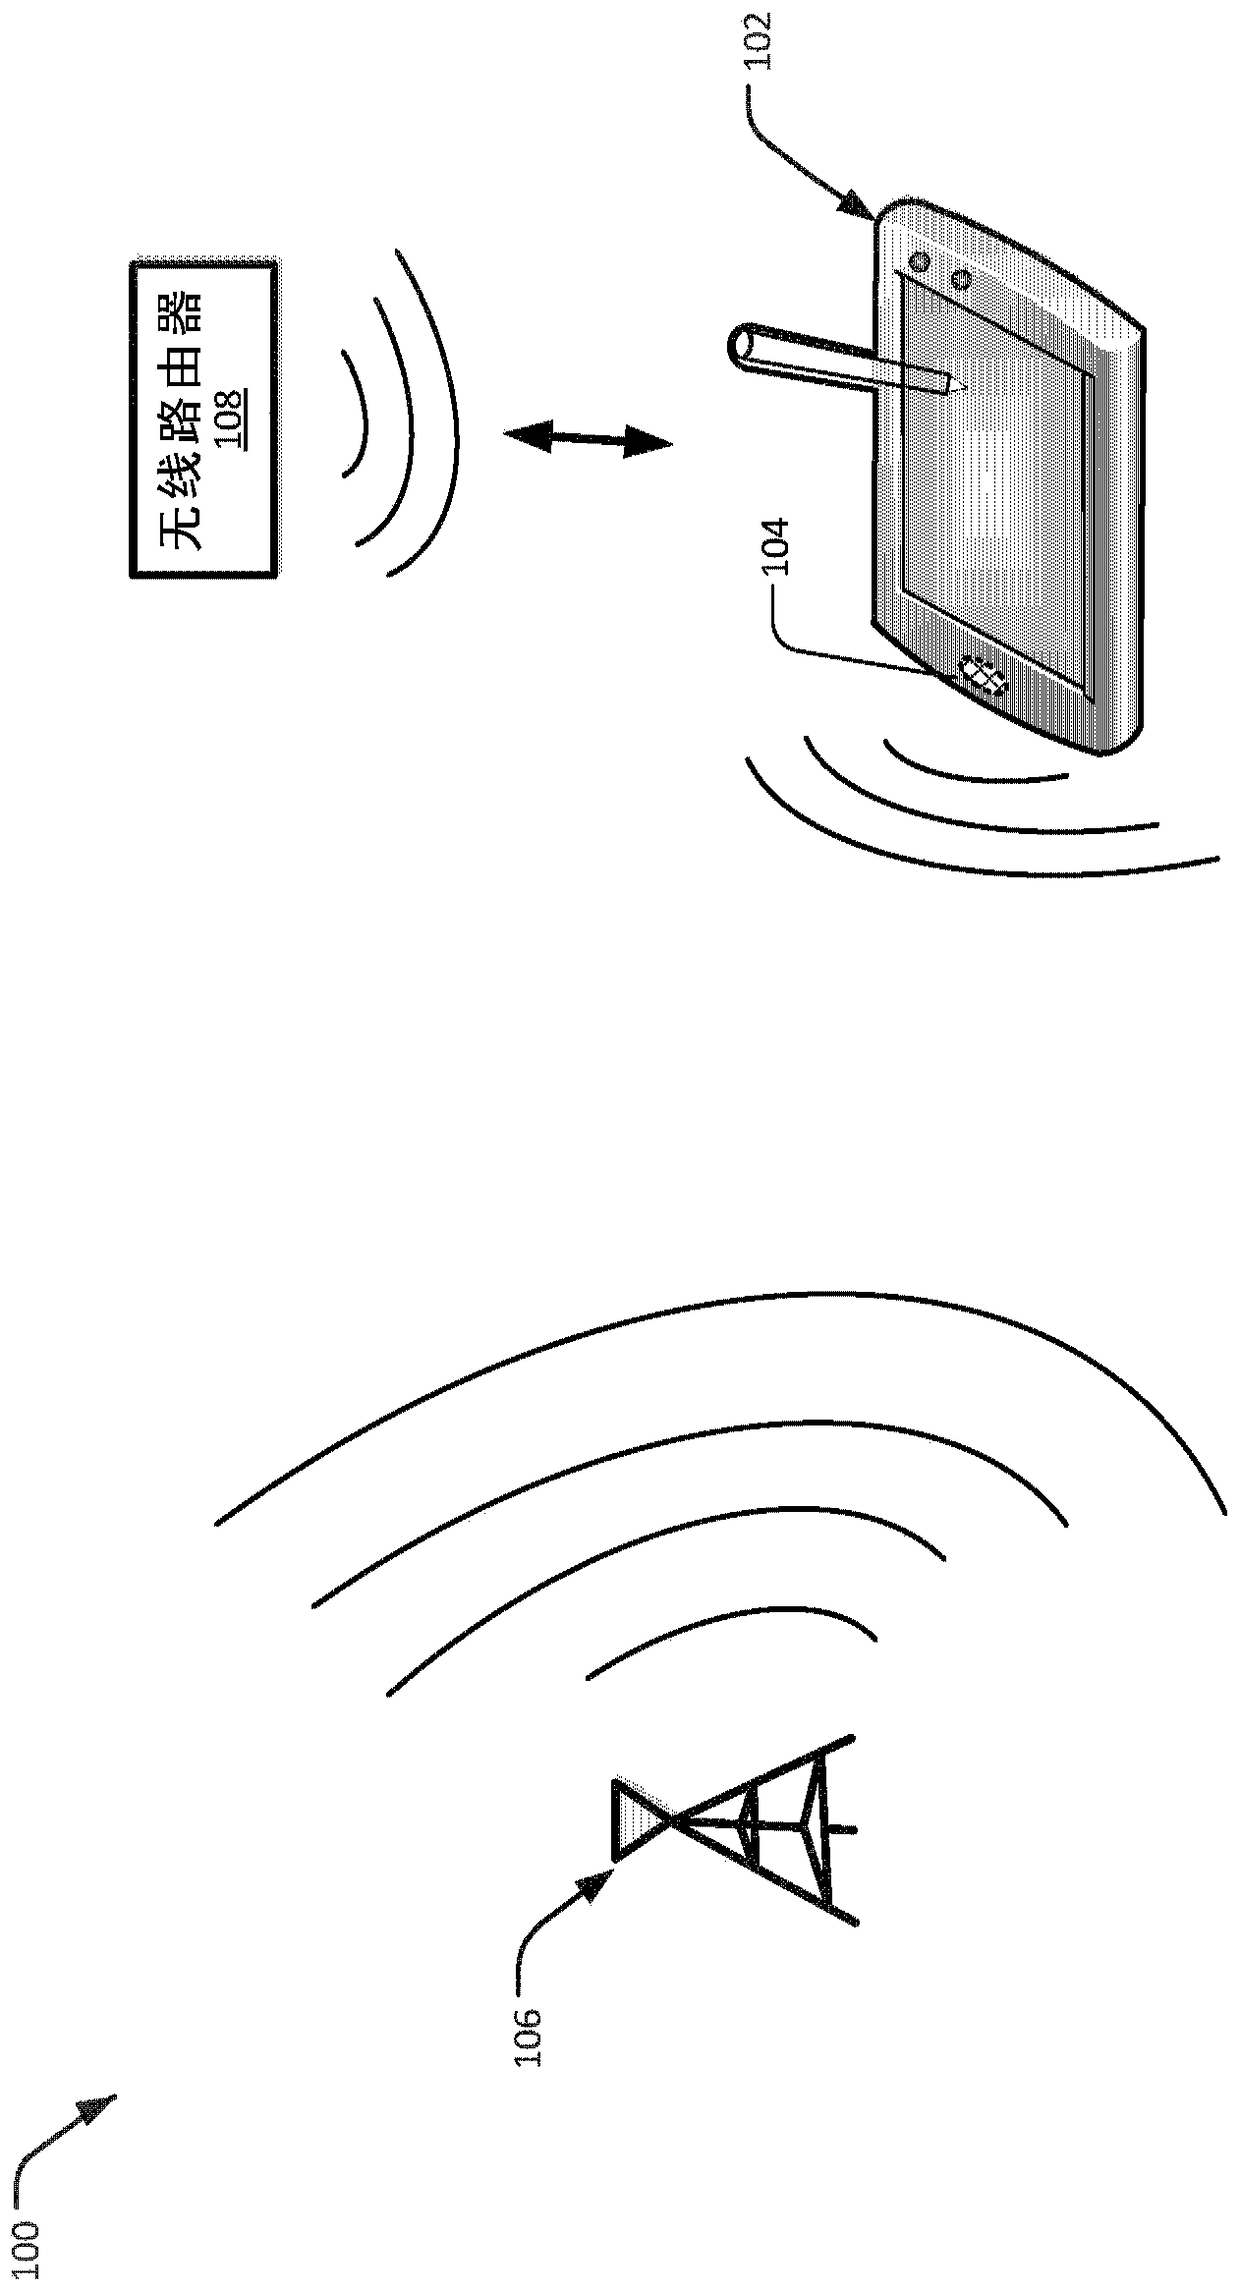 Cellular Uplink Harmonic Spurious Suppression in Wi-Fi and Bluetooth Receivers